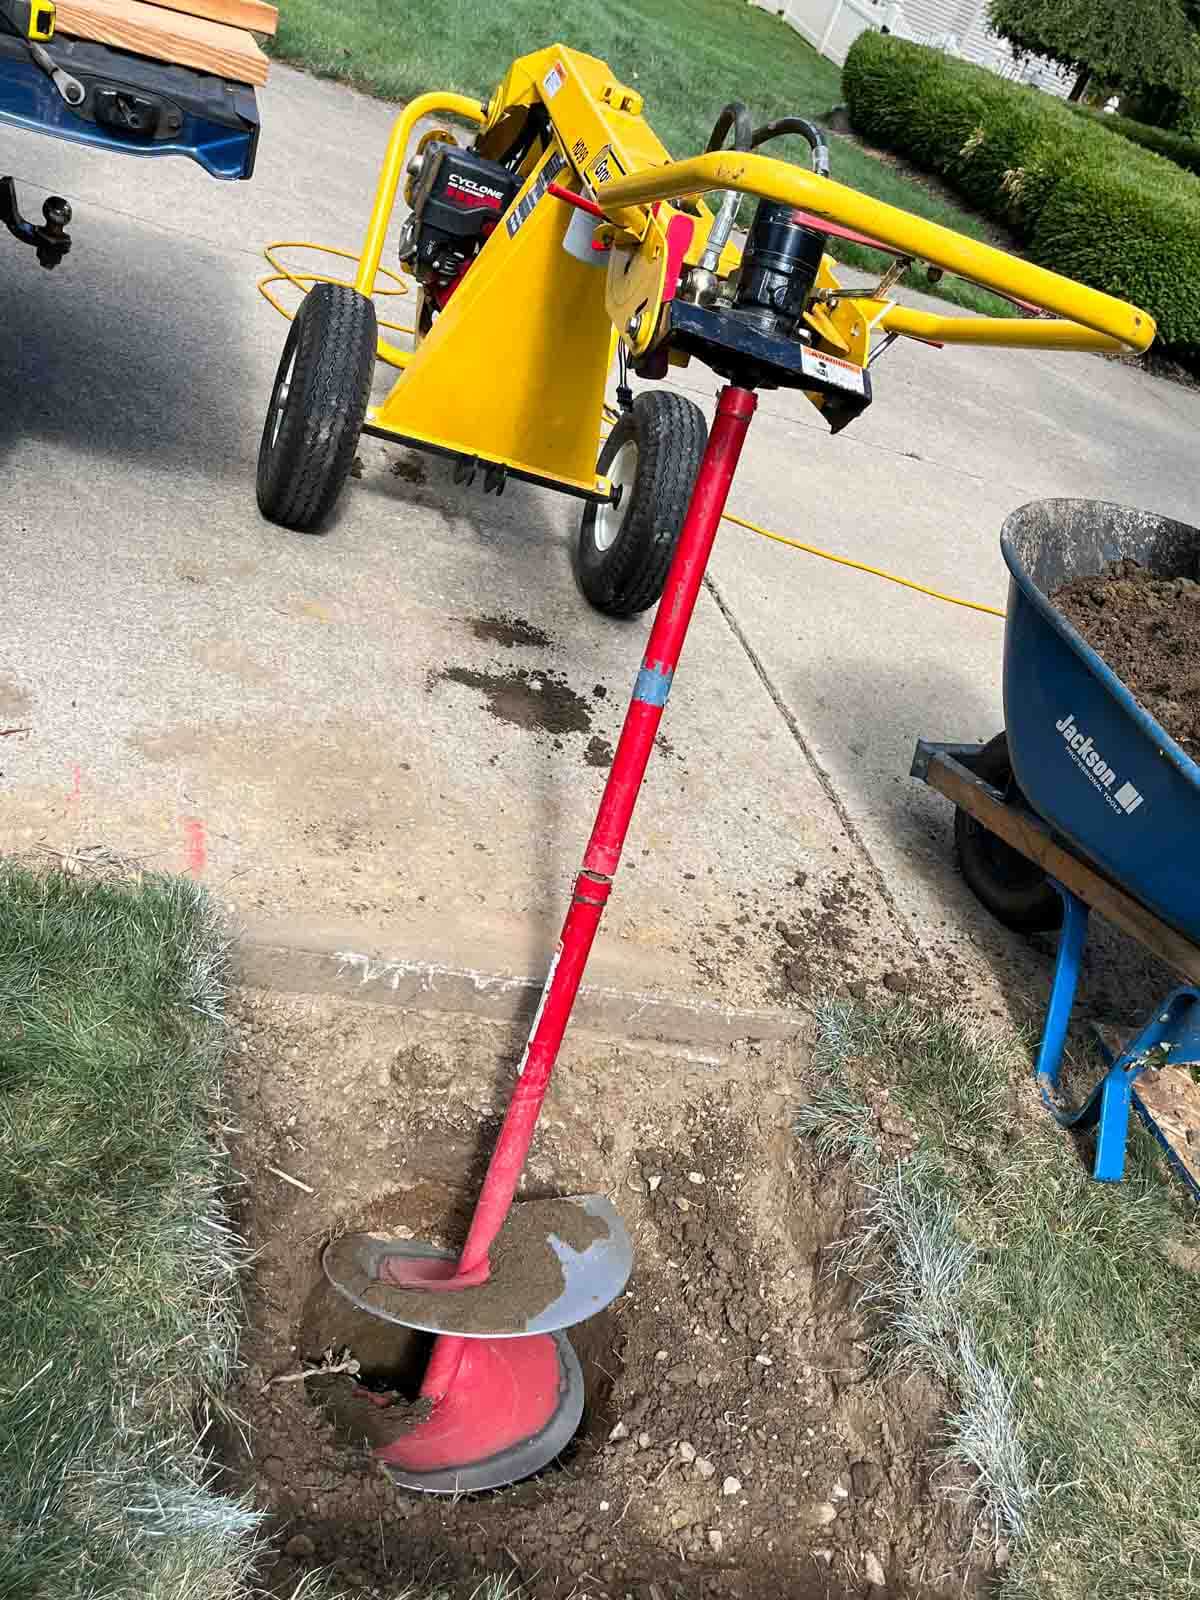 towable auger digging hole for basketball hoop.